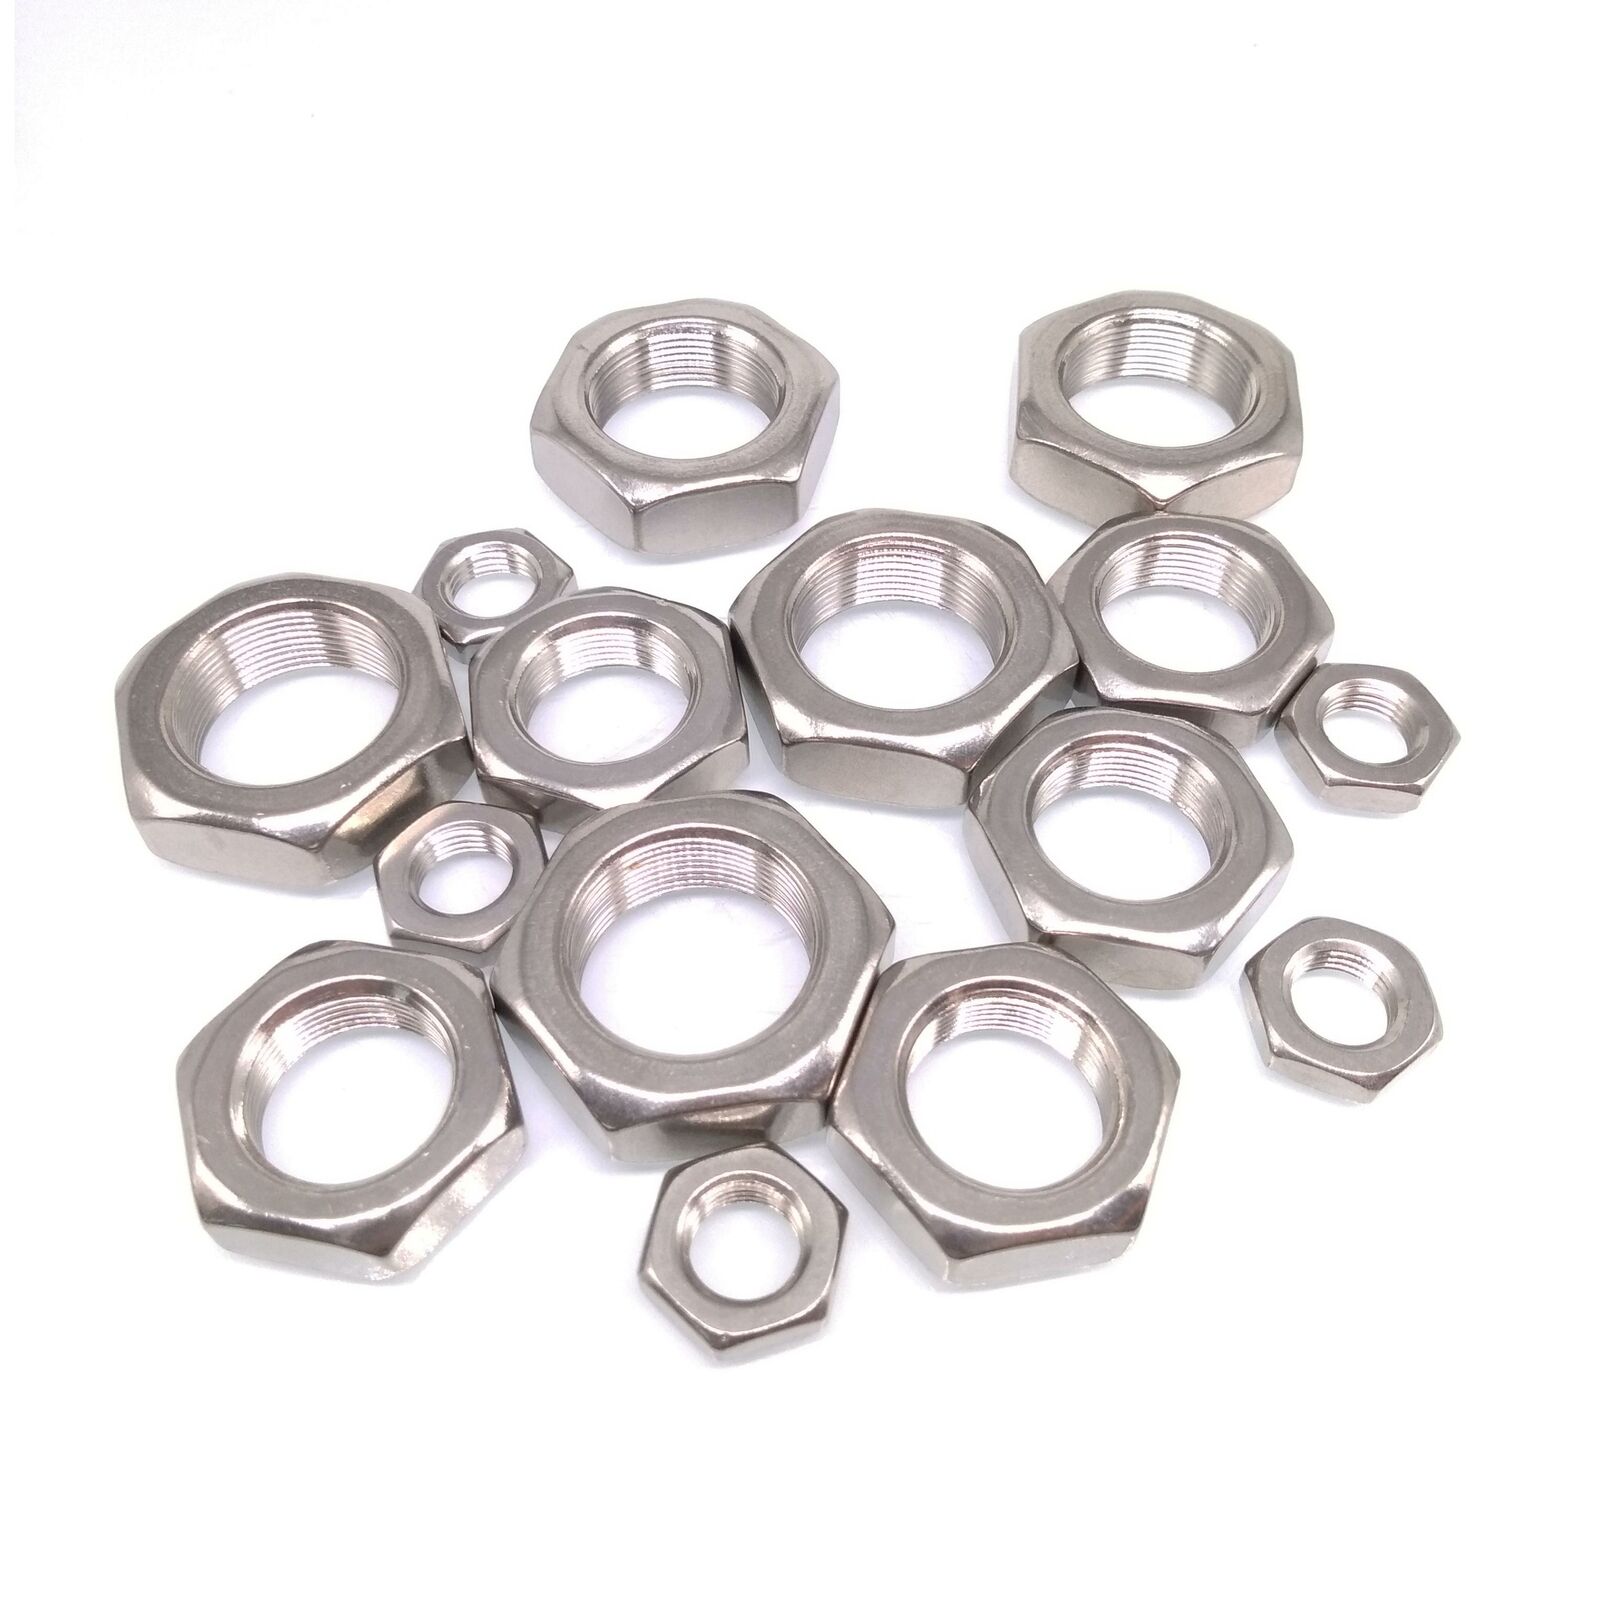 20pcs M12 x 1.0mm Fine Thread Hex Half Thin Jam Nuts A2 304 Stainless Steel